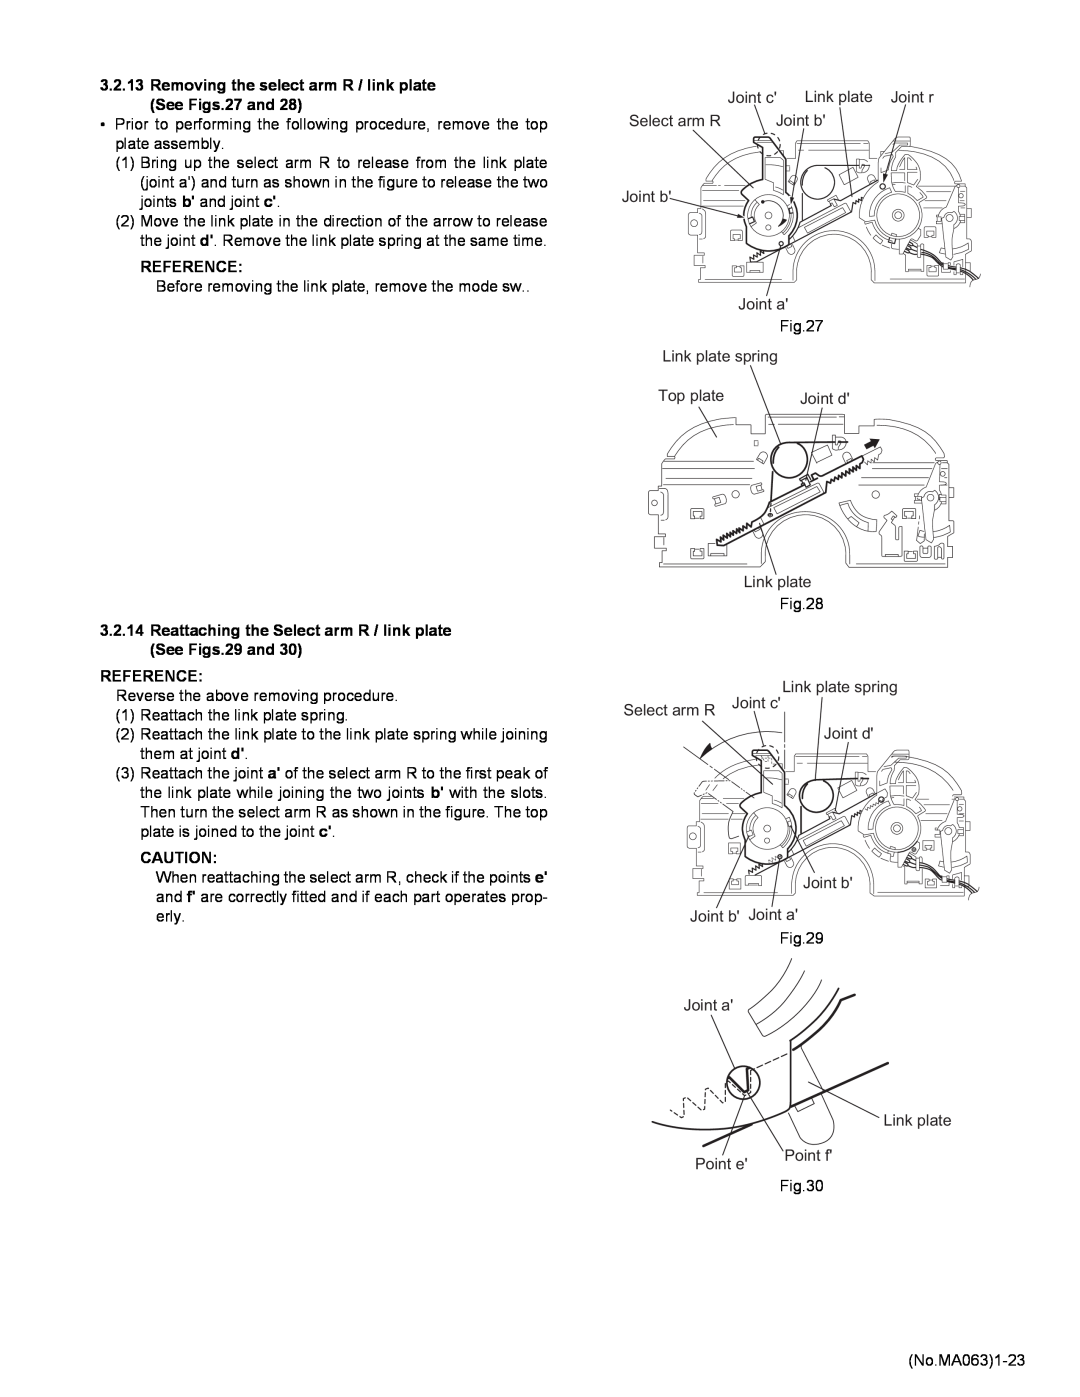 JVC KD-LH401 service manual Removing the select arm R / link plate See Figs.27 and, Reference 